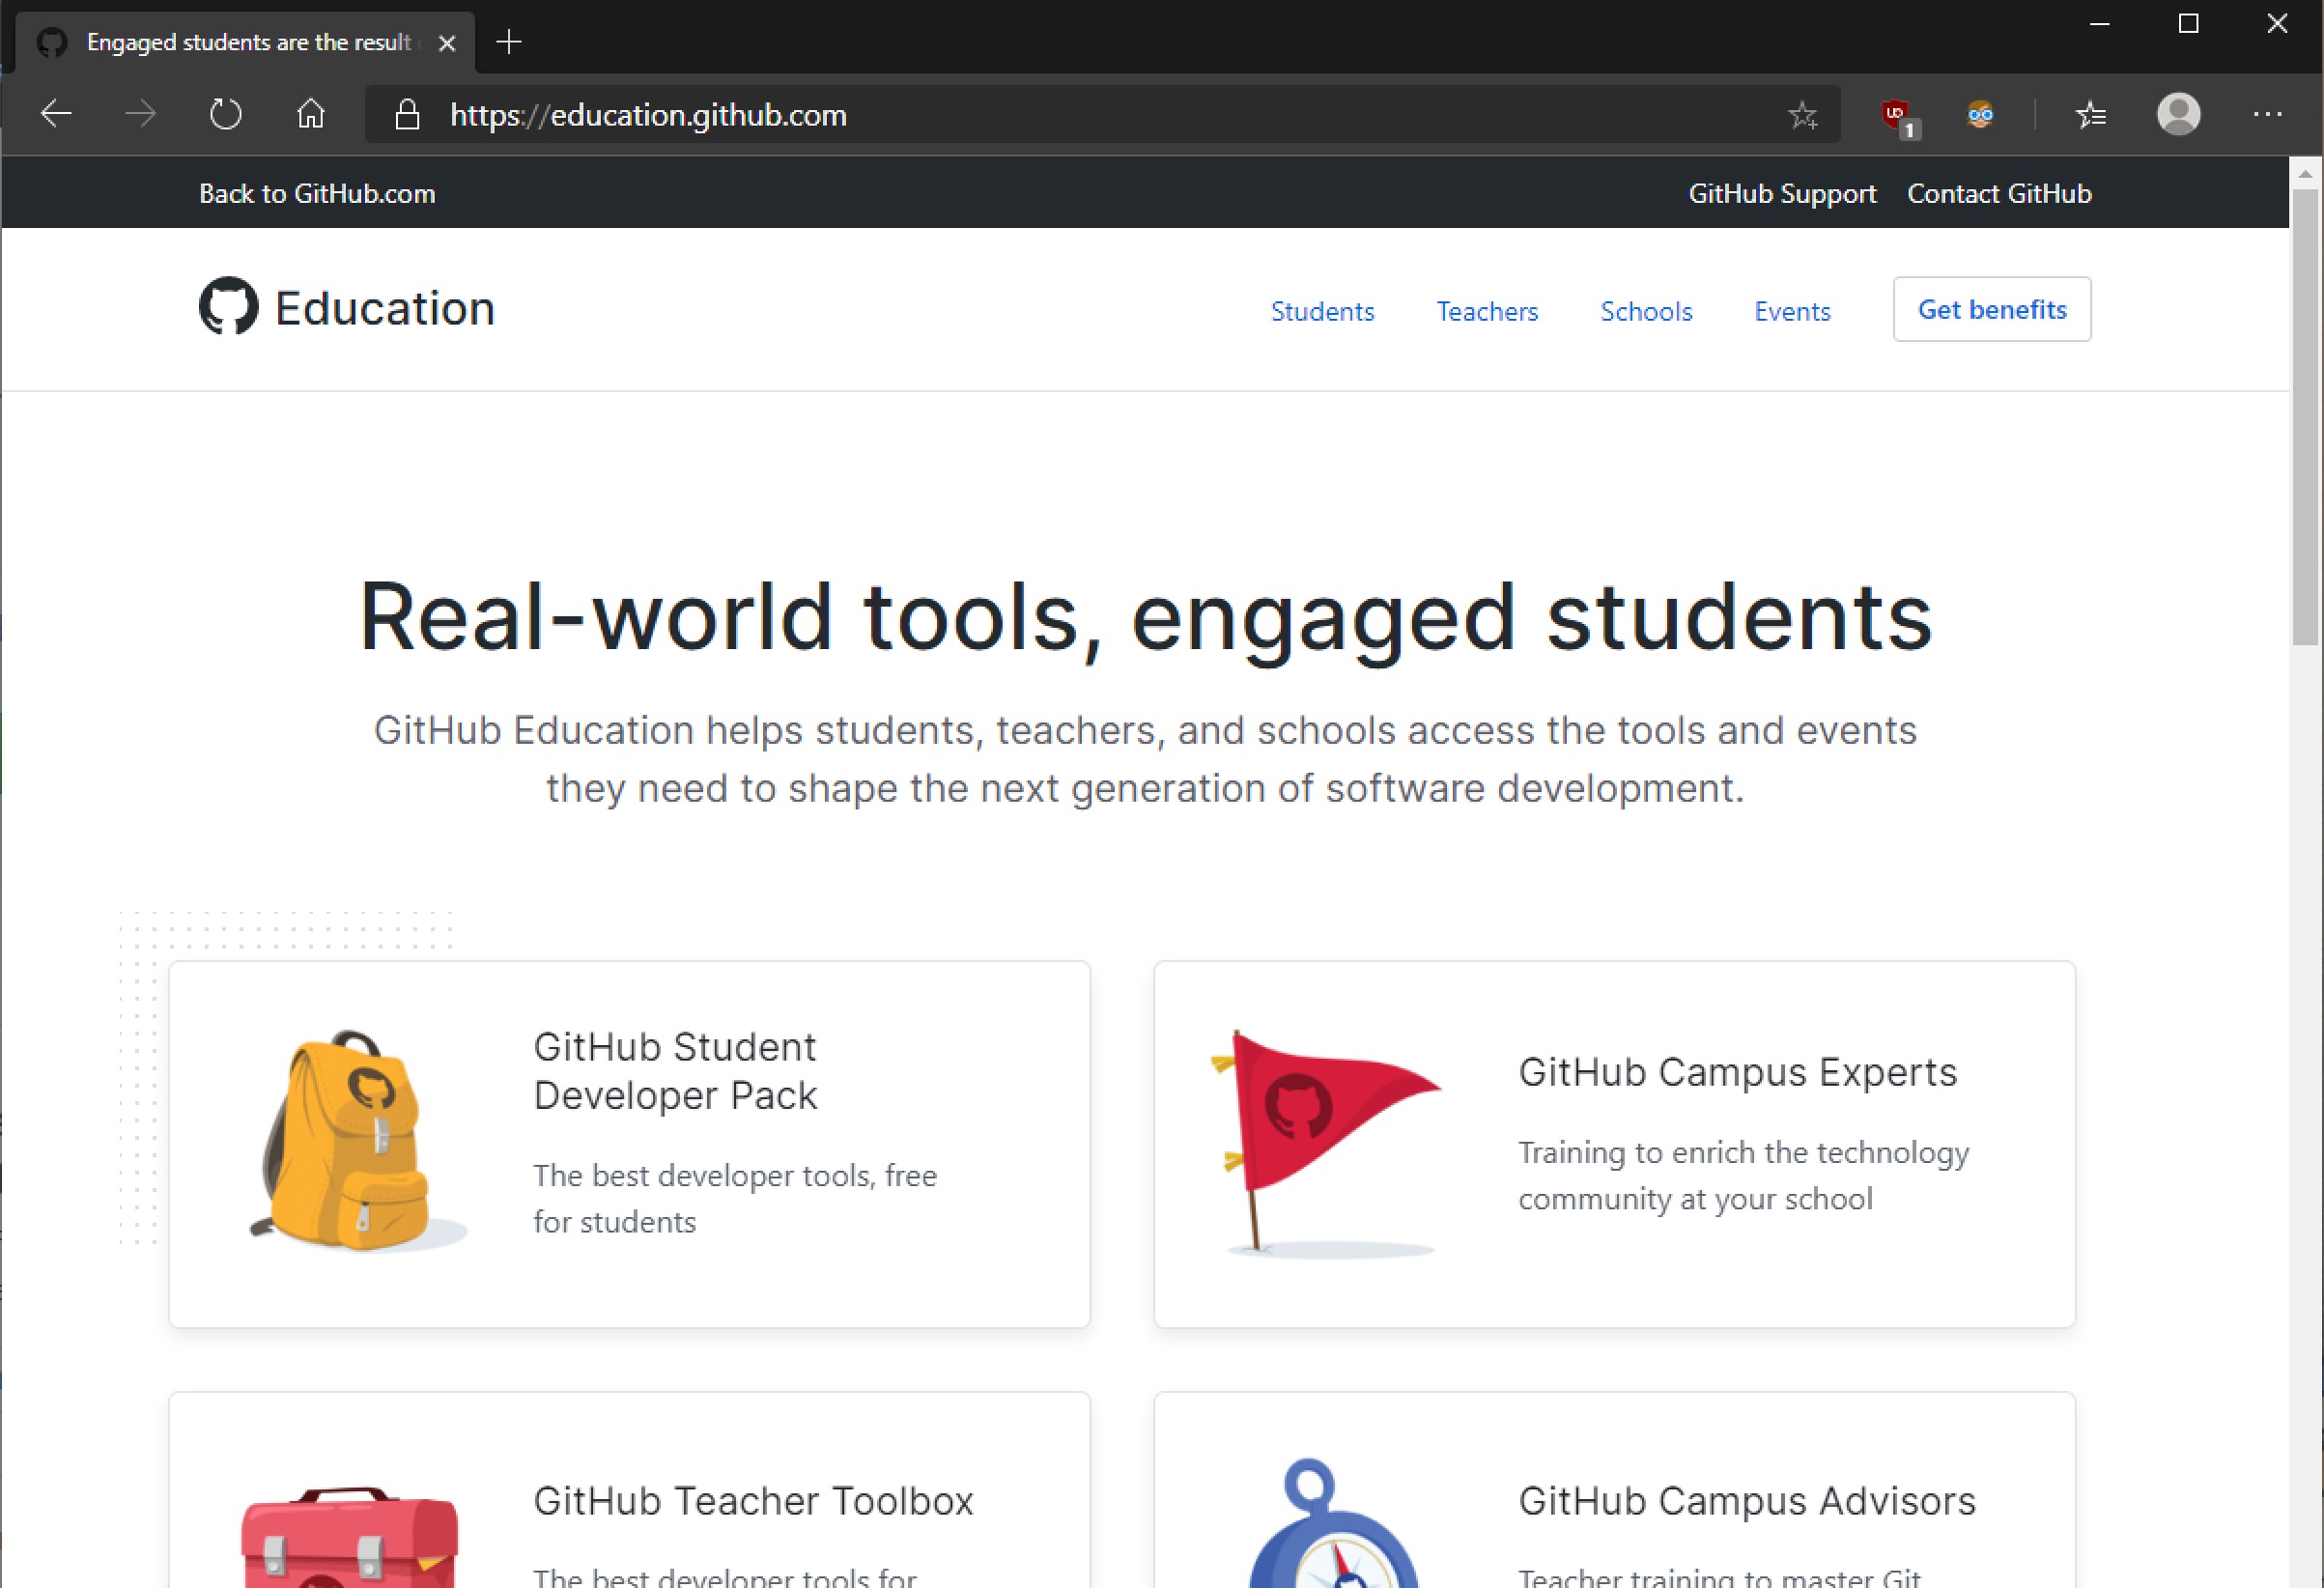 Go to the GitHub Education website and click Get benefits